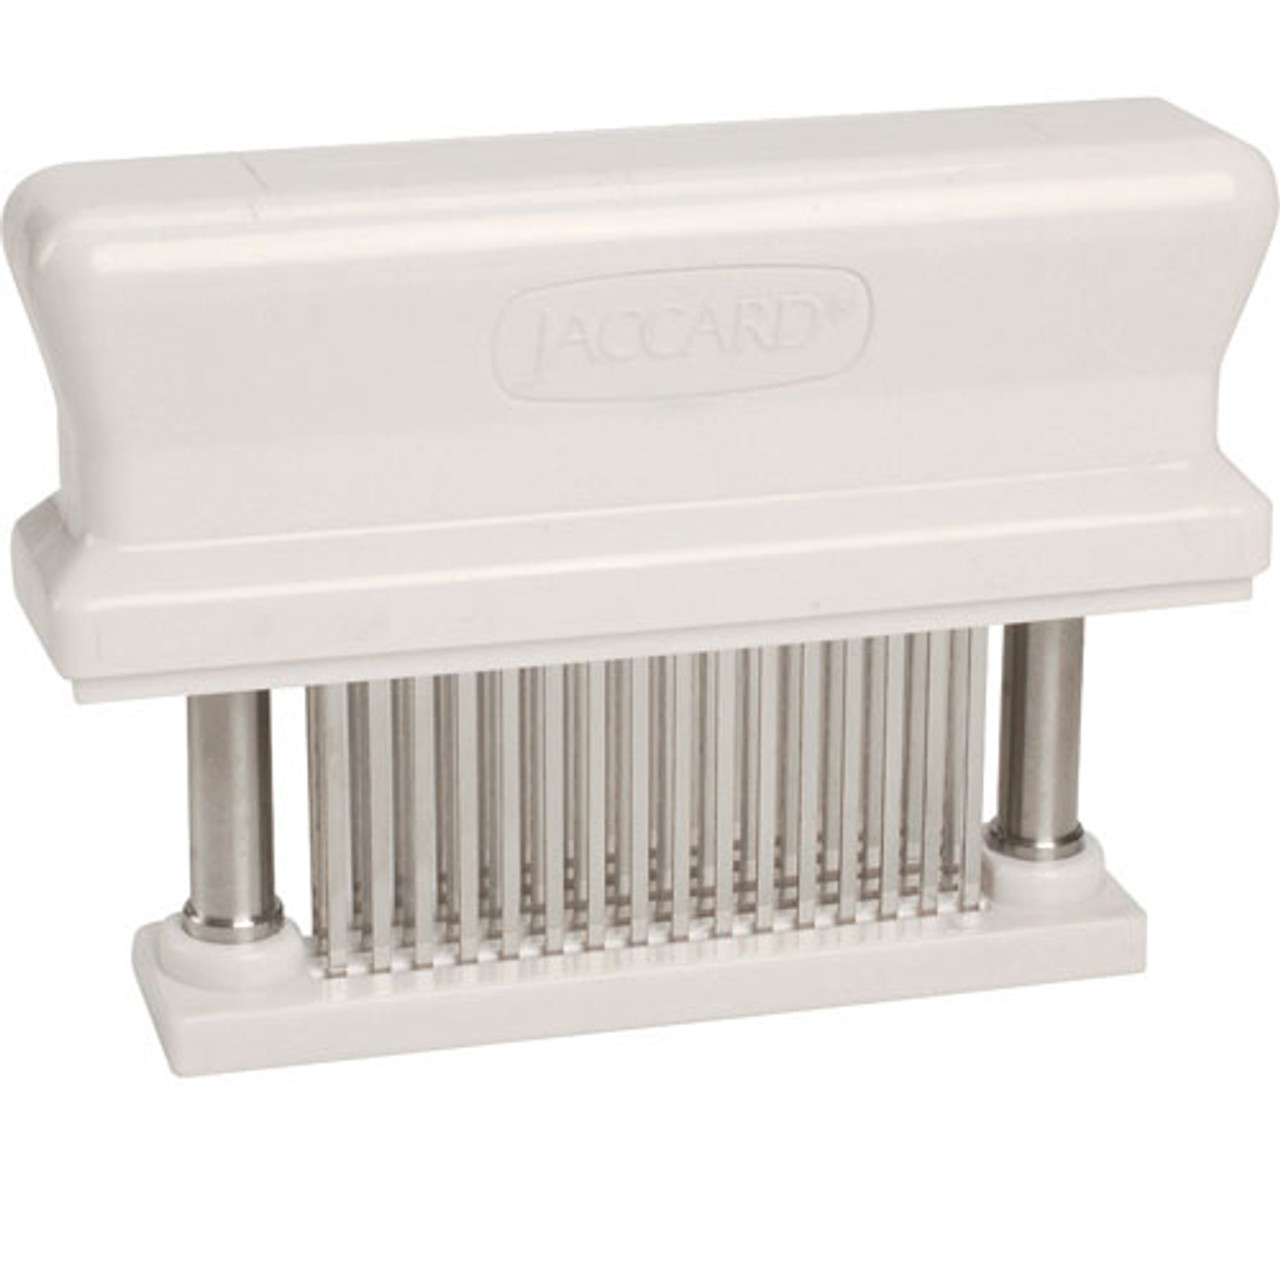 Meat Tenderizer 3 - Replacement Part For Jaccard 200348